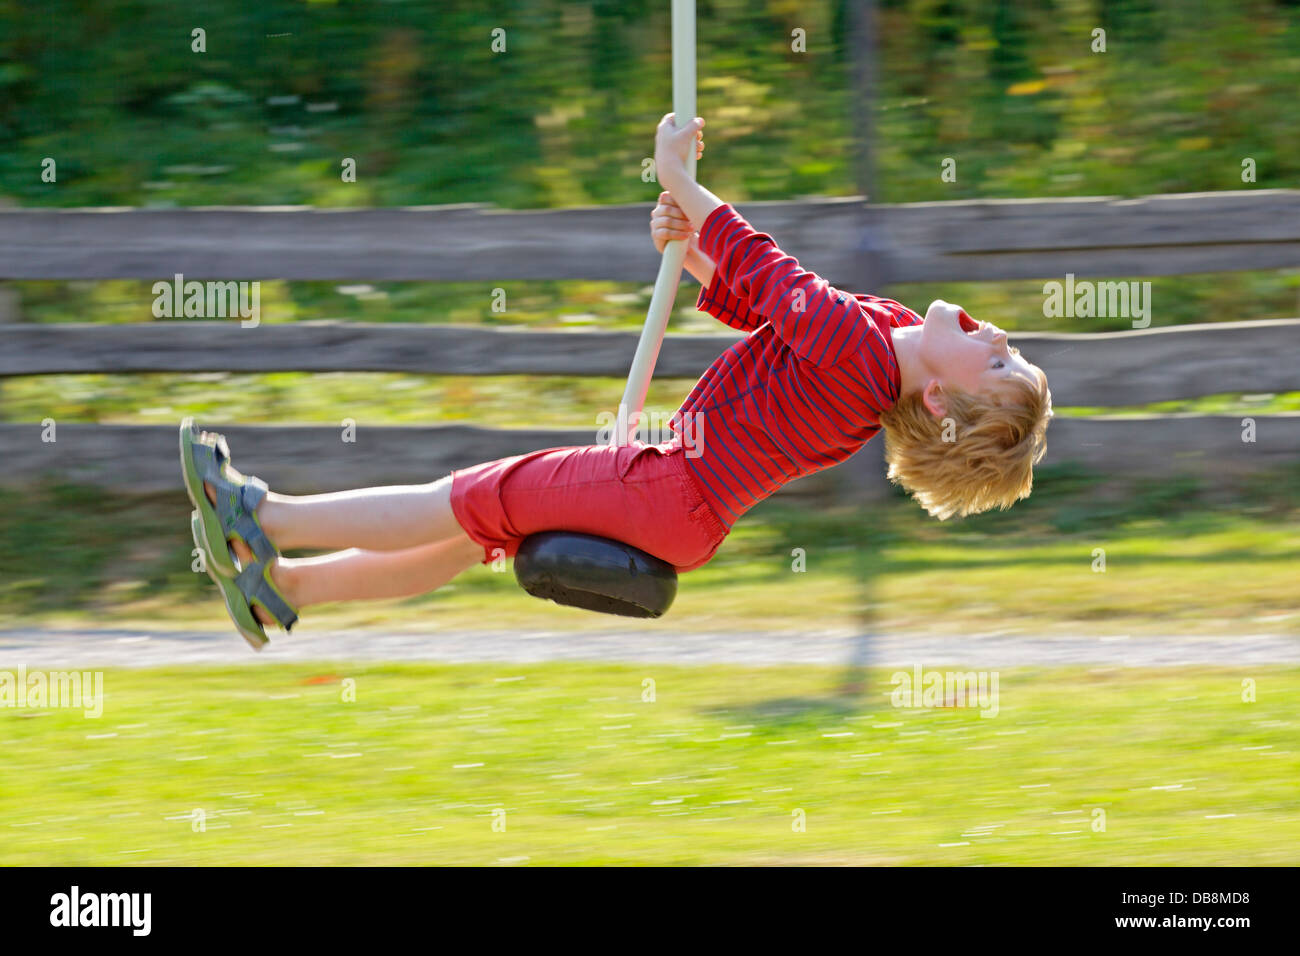 young boy riding playground ropeway Stock Photo